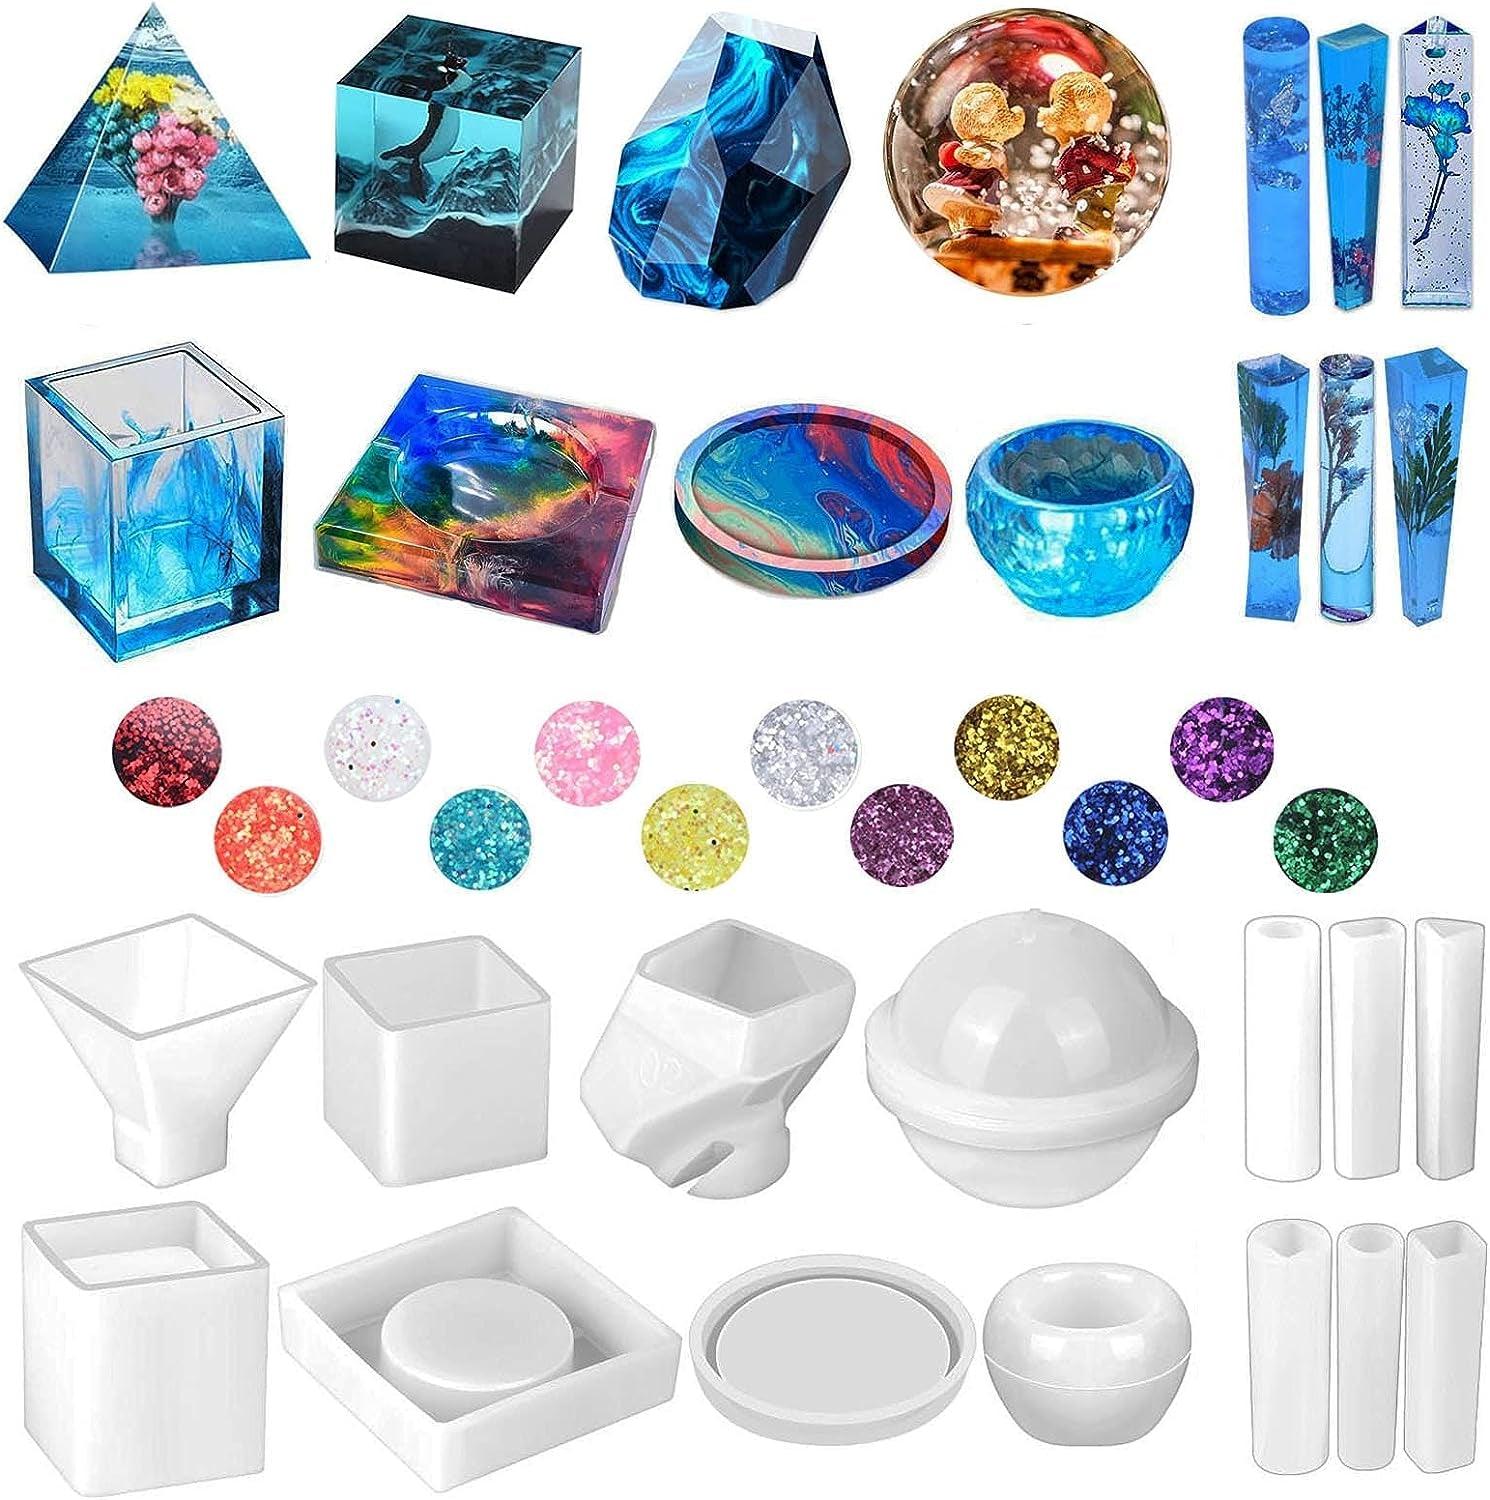 LET'S RESIN Resin Kits and Molds Complete Set, 16OZ Resin Molds Silicone  Kit Bundle with Sphere, Pyramid Molds, Resin Epoxy Starter Kit for Beginner